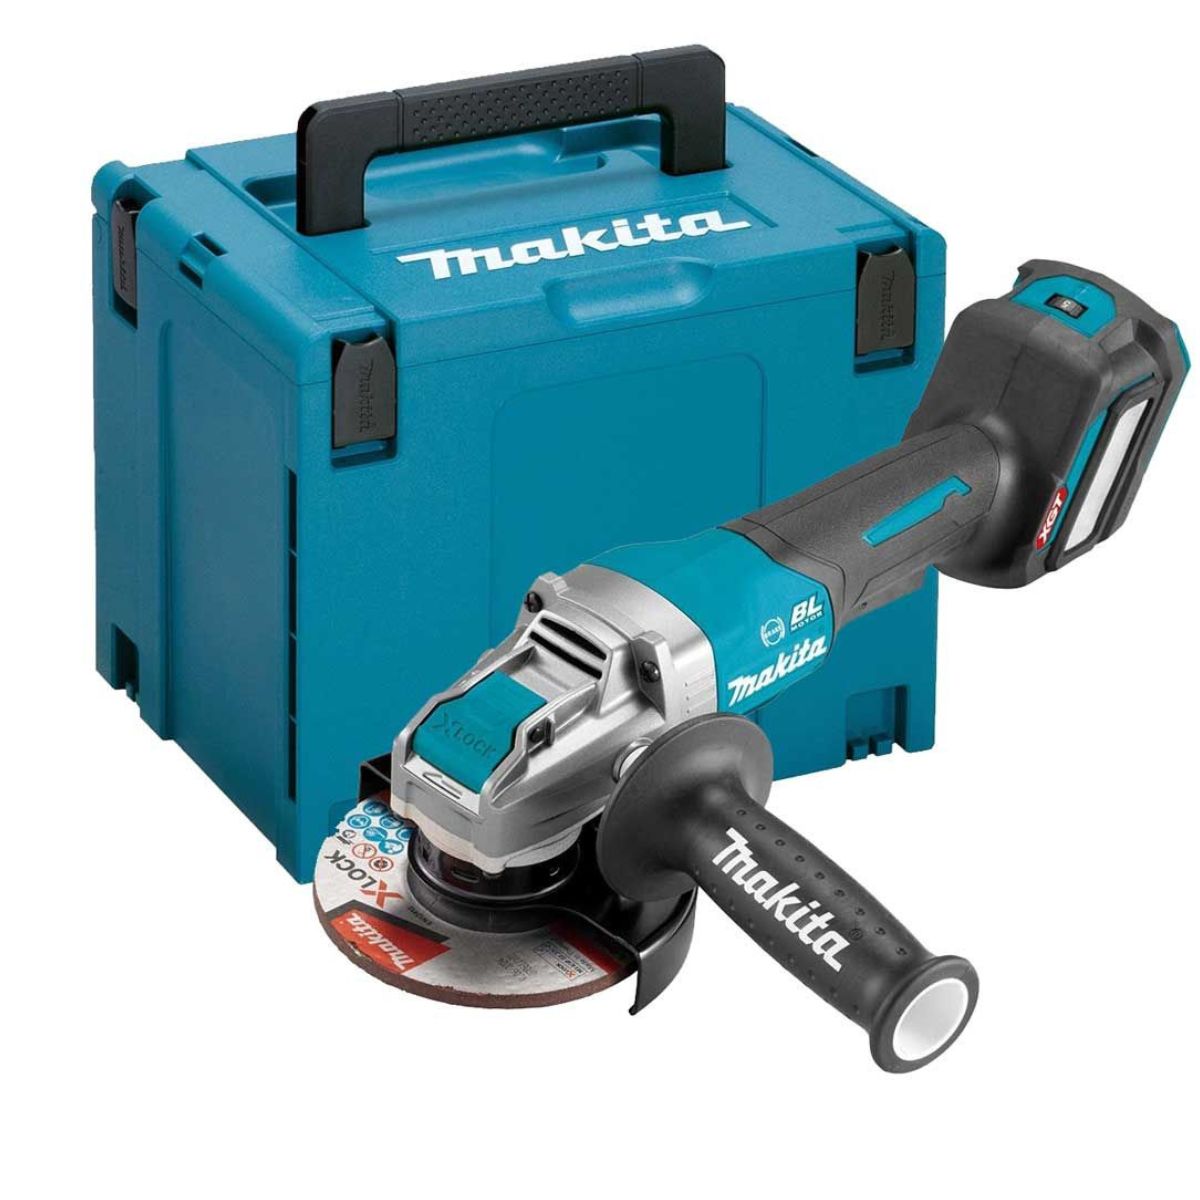 Makita GA044GZ01 40v XGT Max 125mm Brushless Angle Grinder Body Only With Carry Case